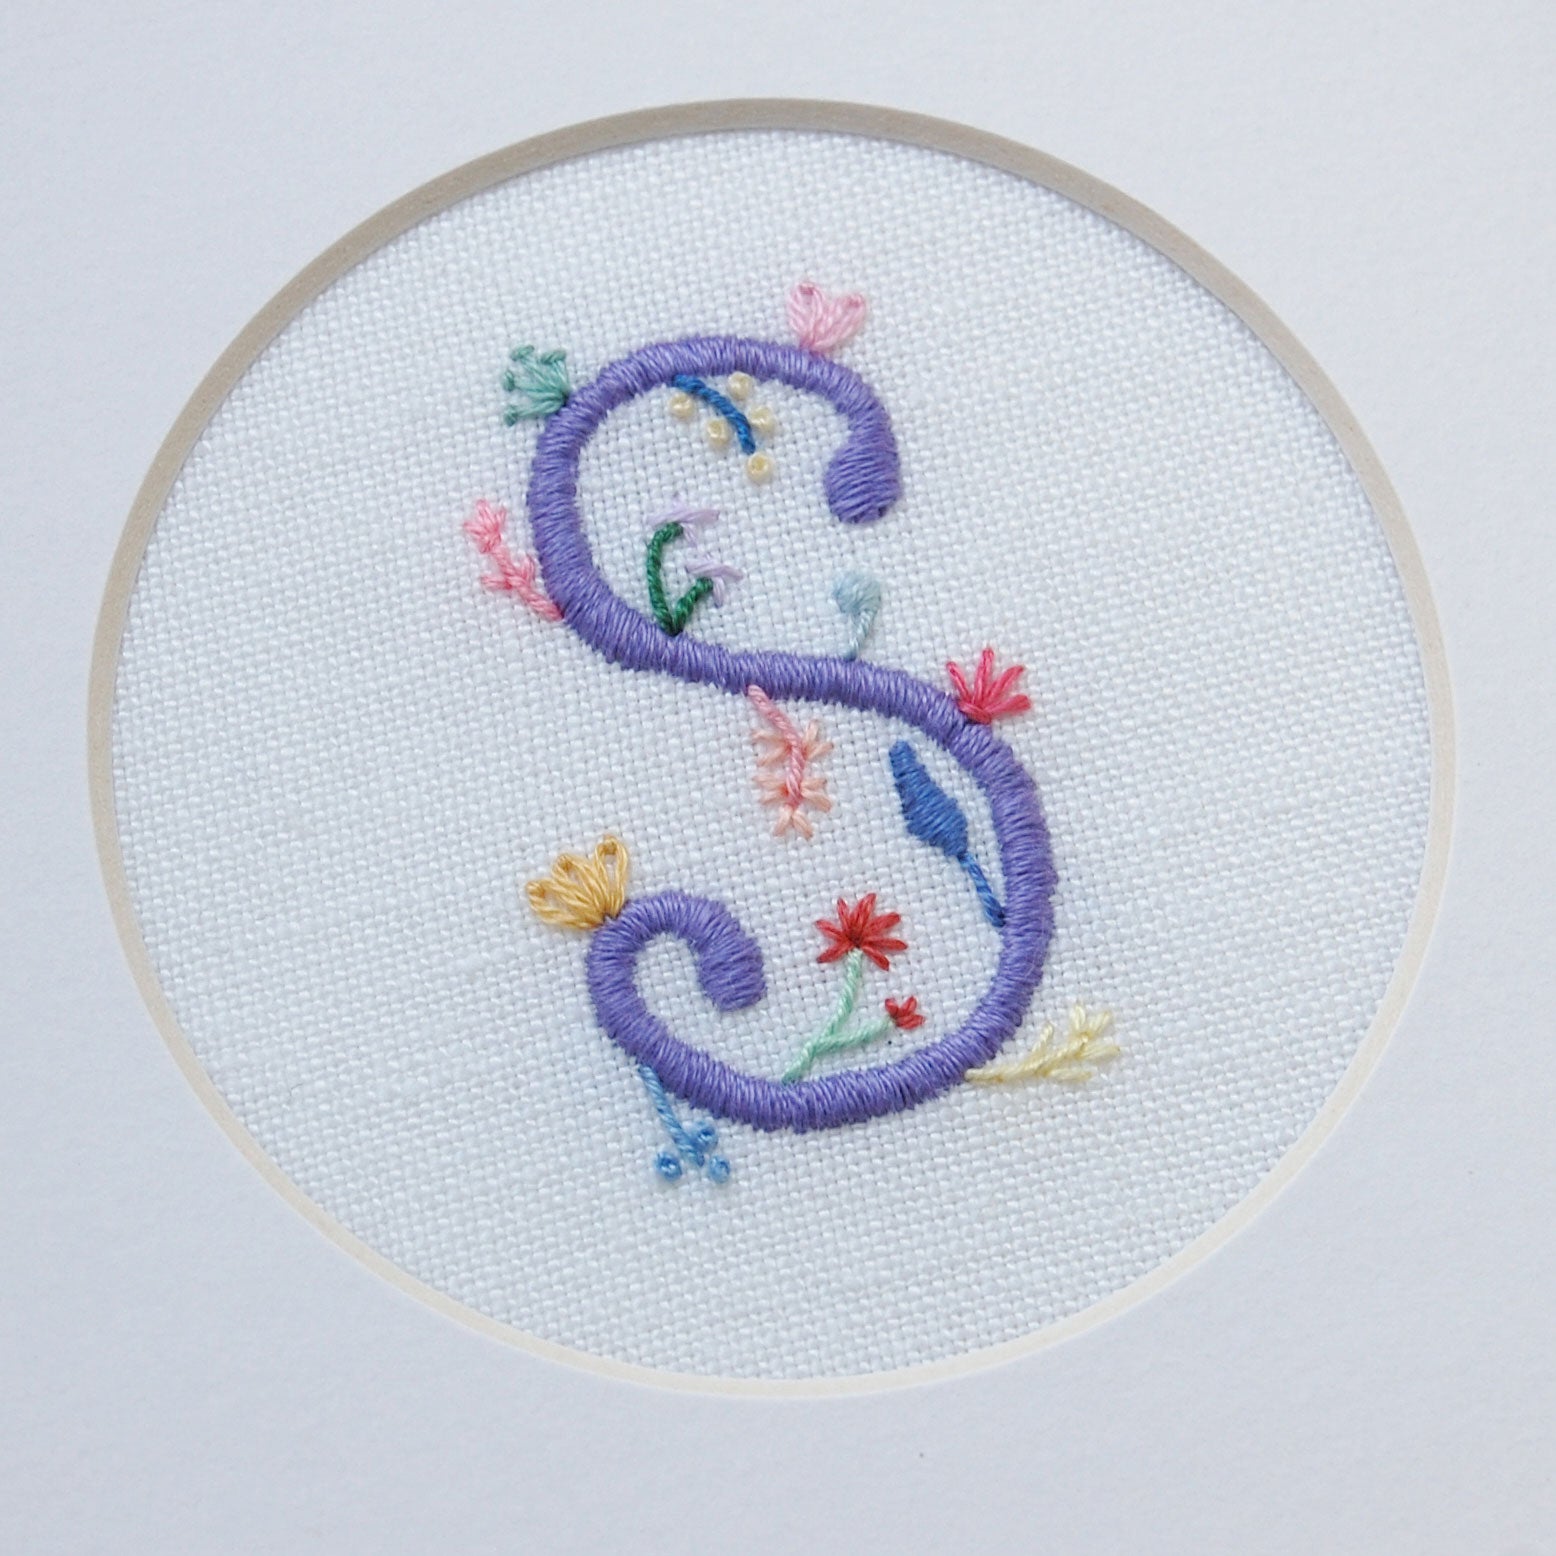 "S" Hand Embroidered Floral Monogram Art